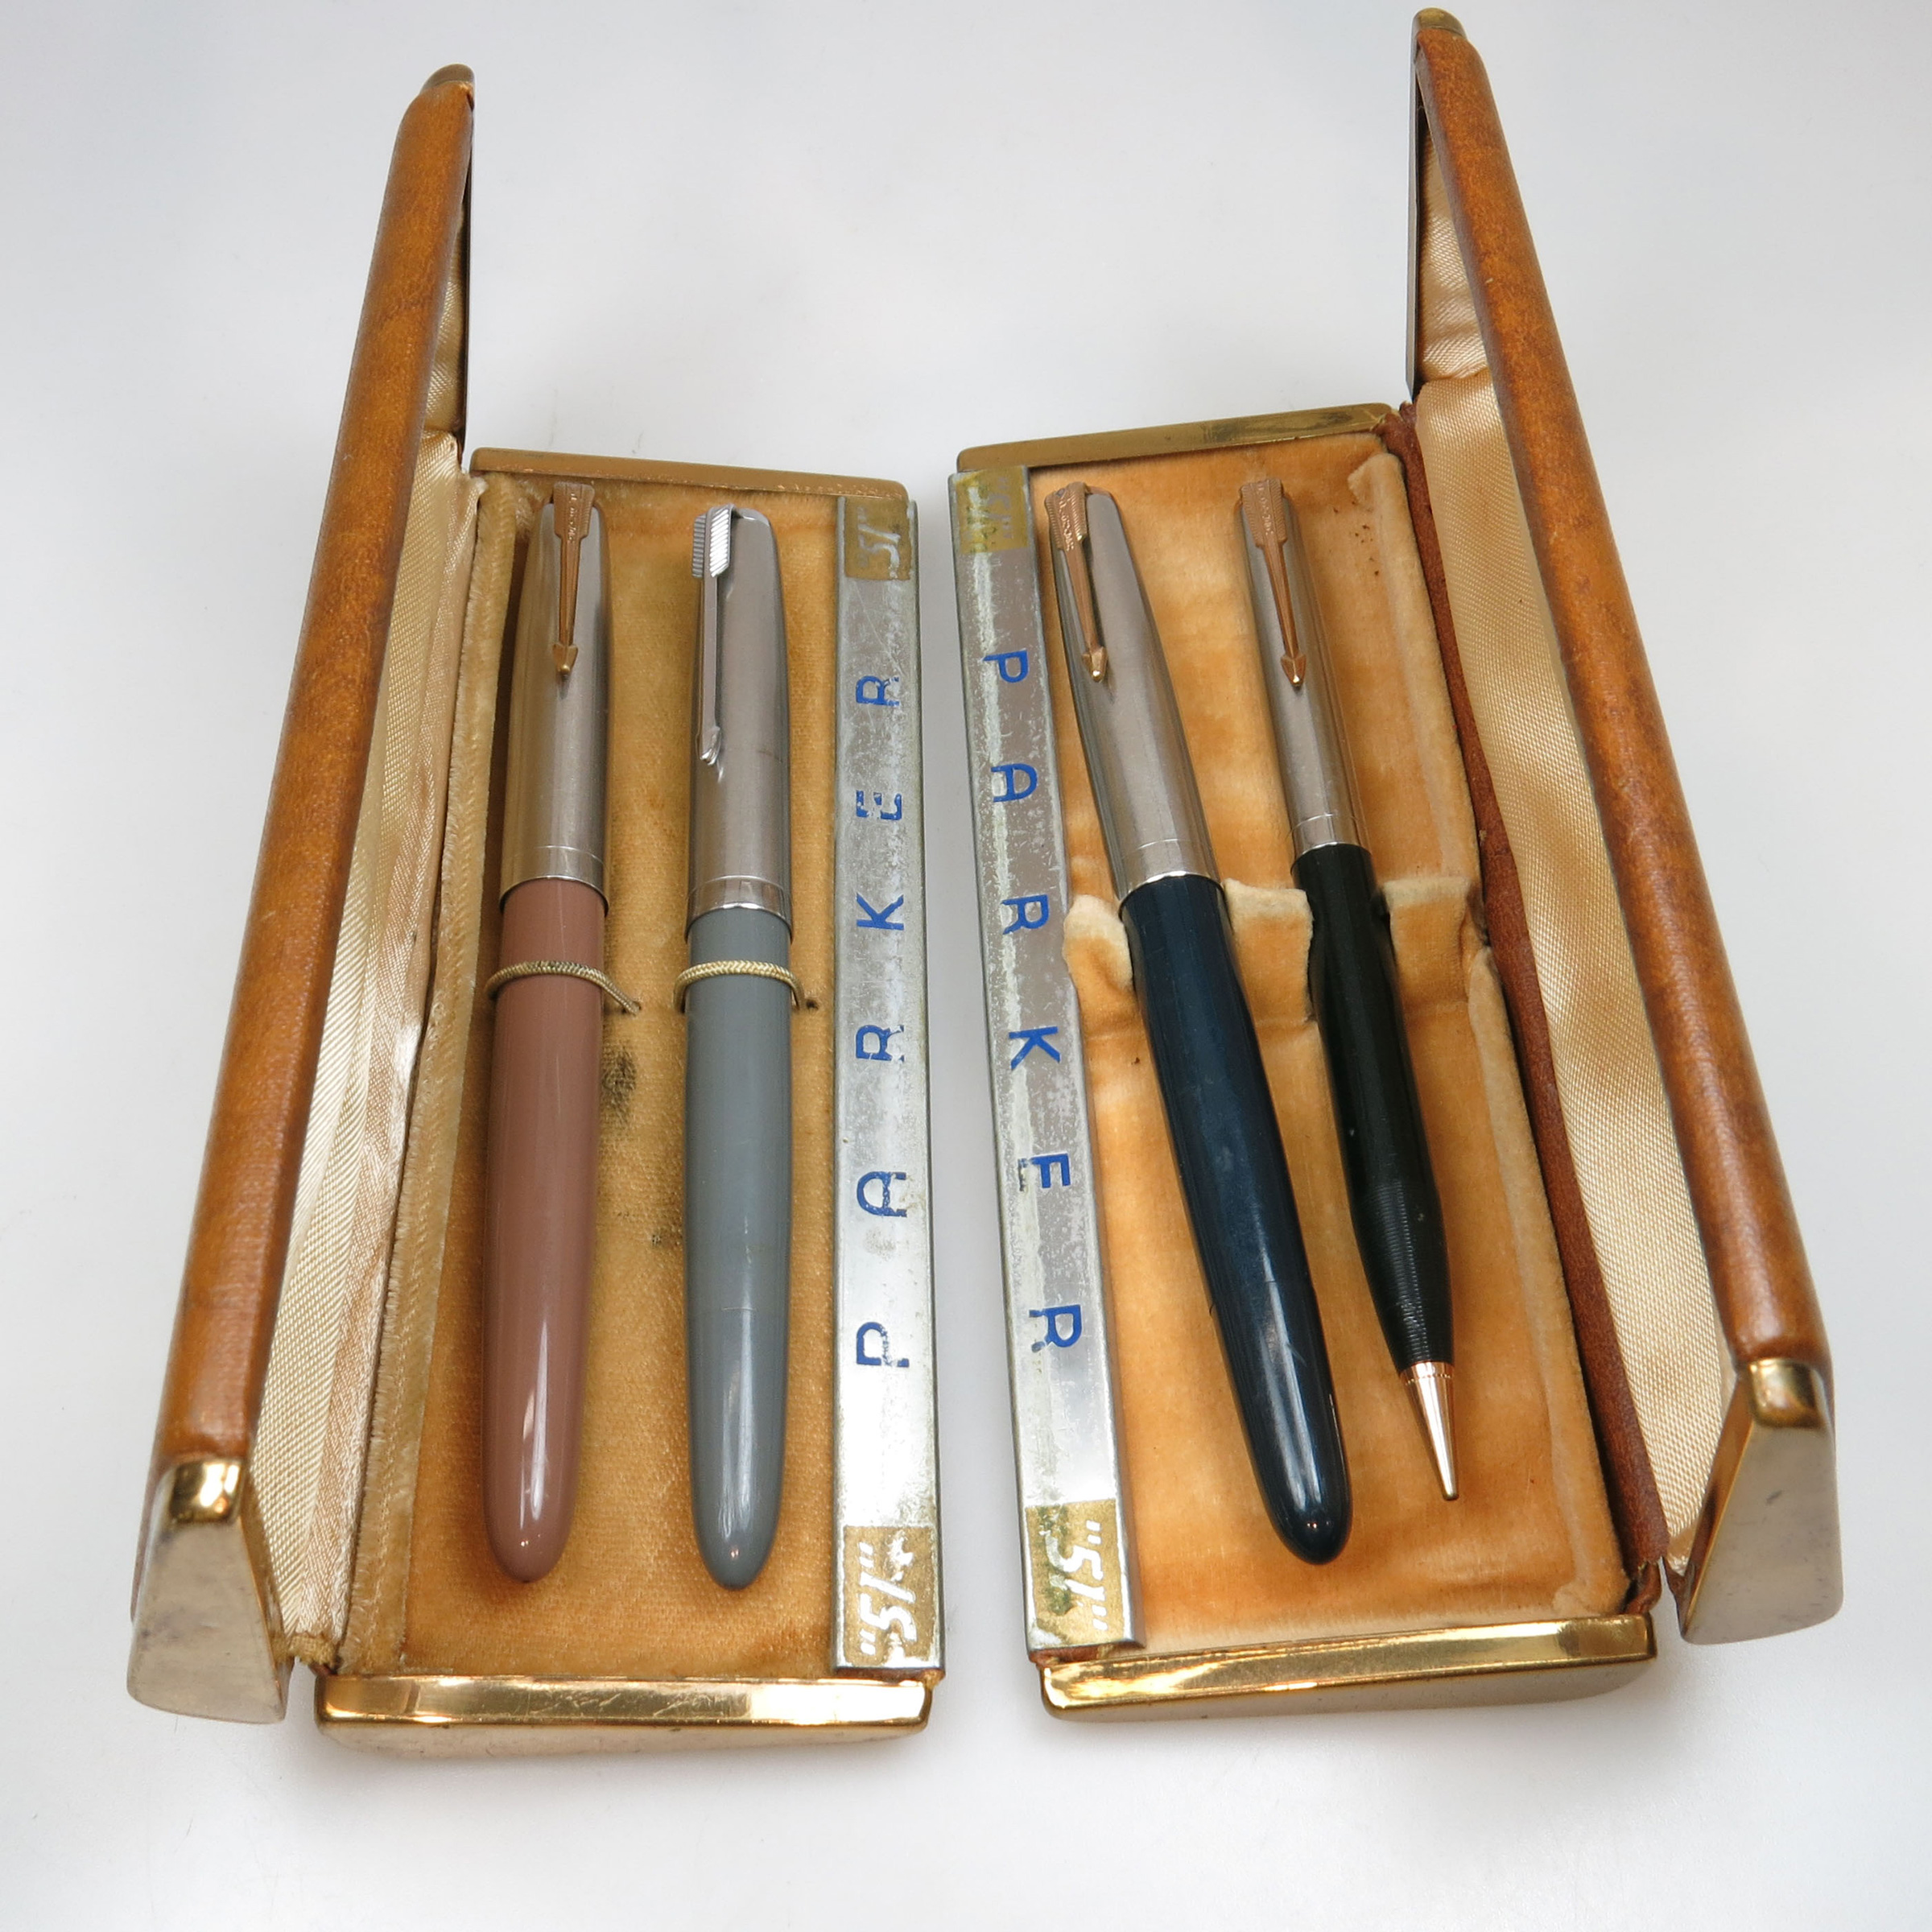 3 Parker 51 Fountain Pens And a Similar Mechanical Pencil